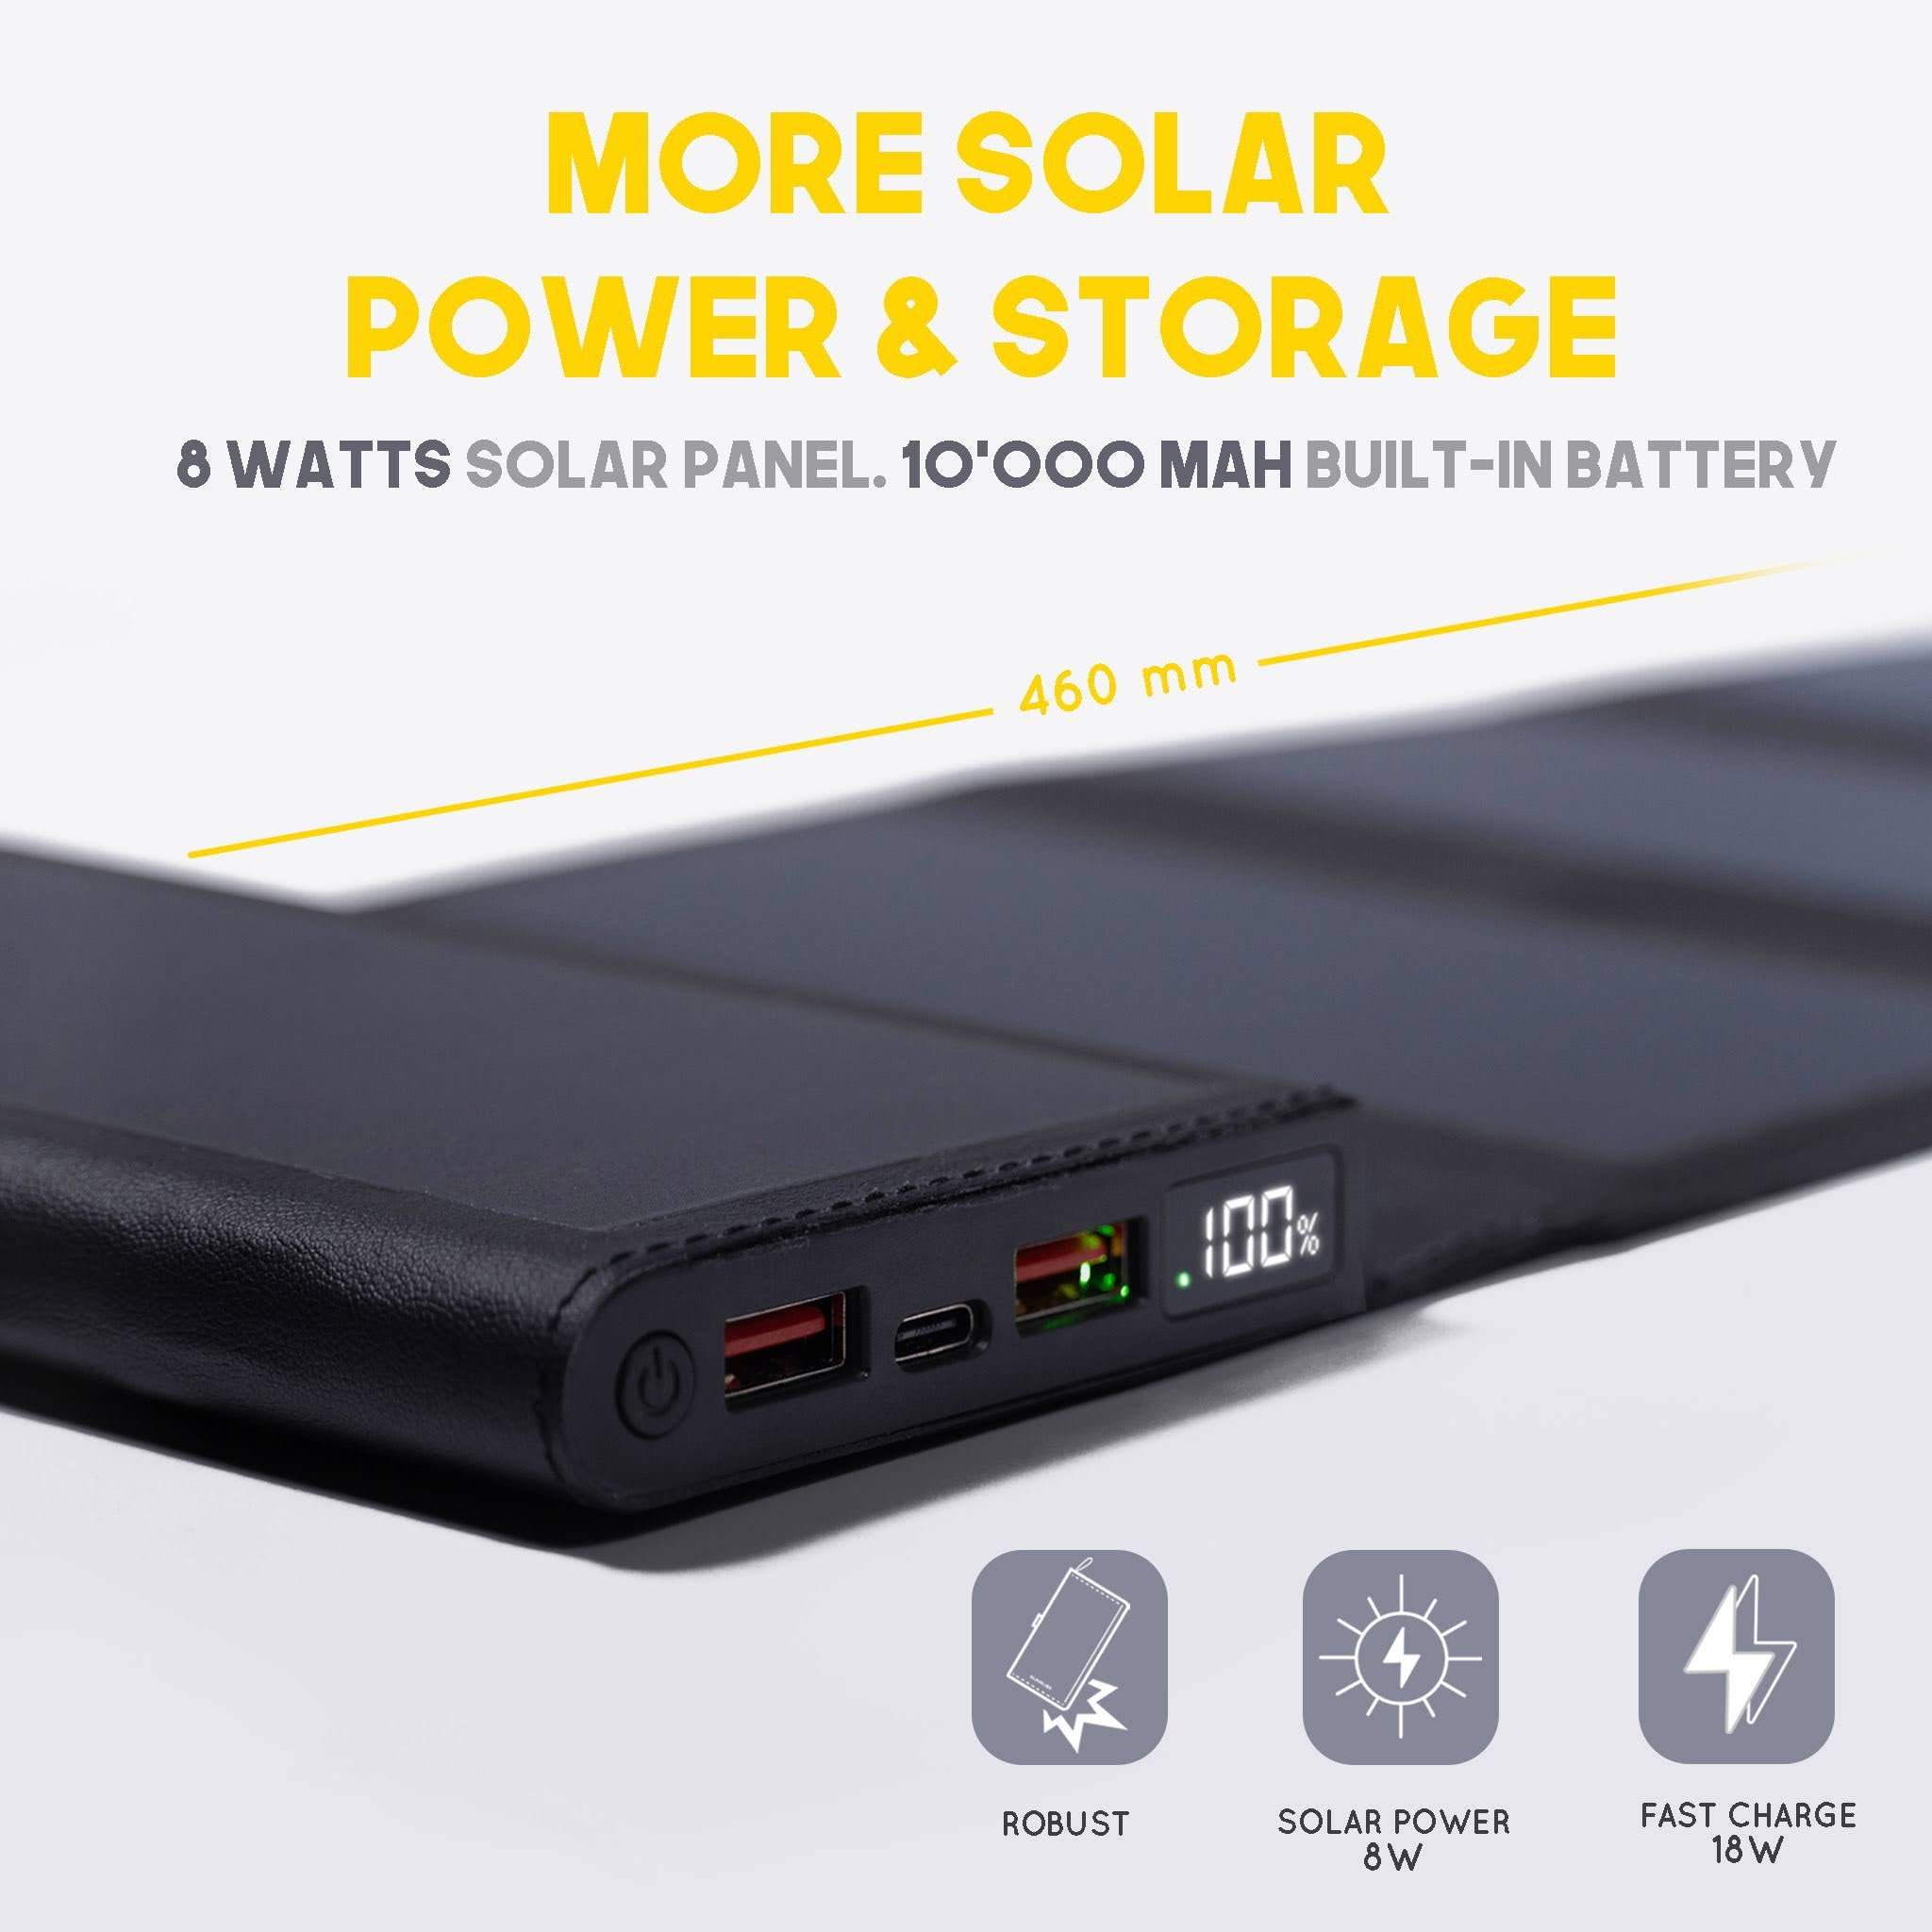 New portable solar charger by Sunslice with an integrated 10000mAh power bank